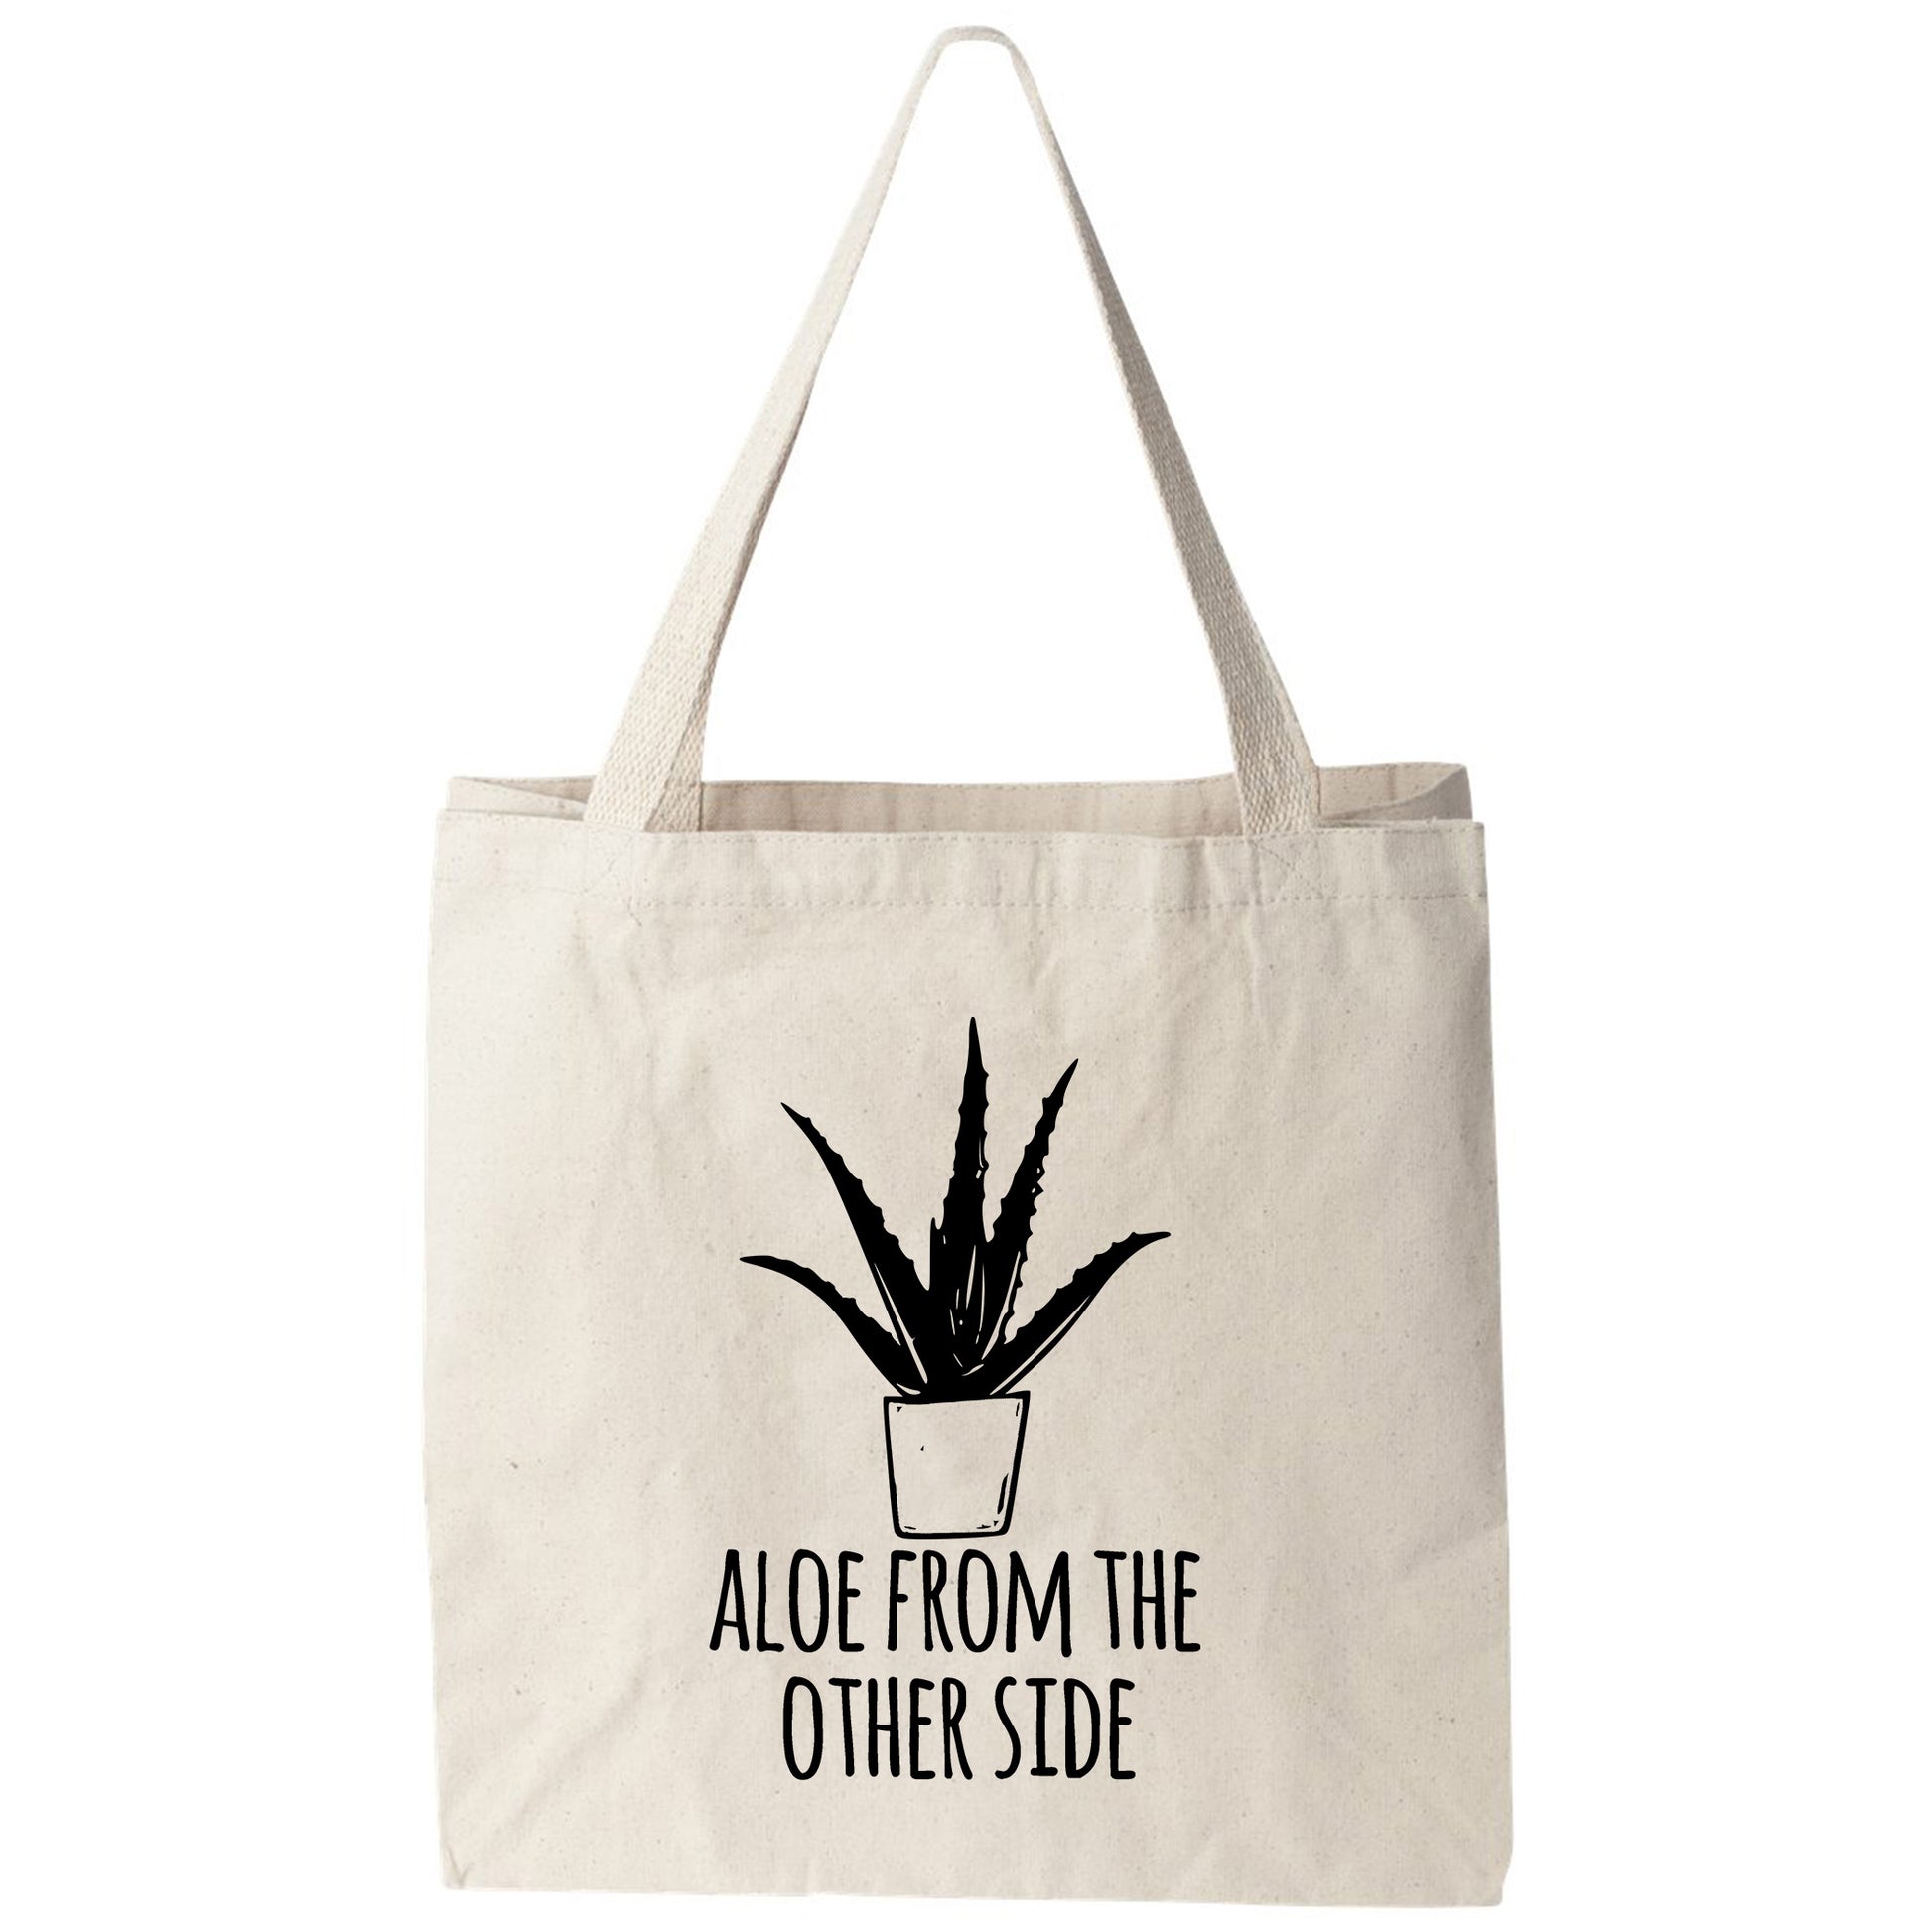 a tote bag with an aloe from the other side printed on it